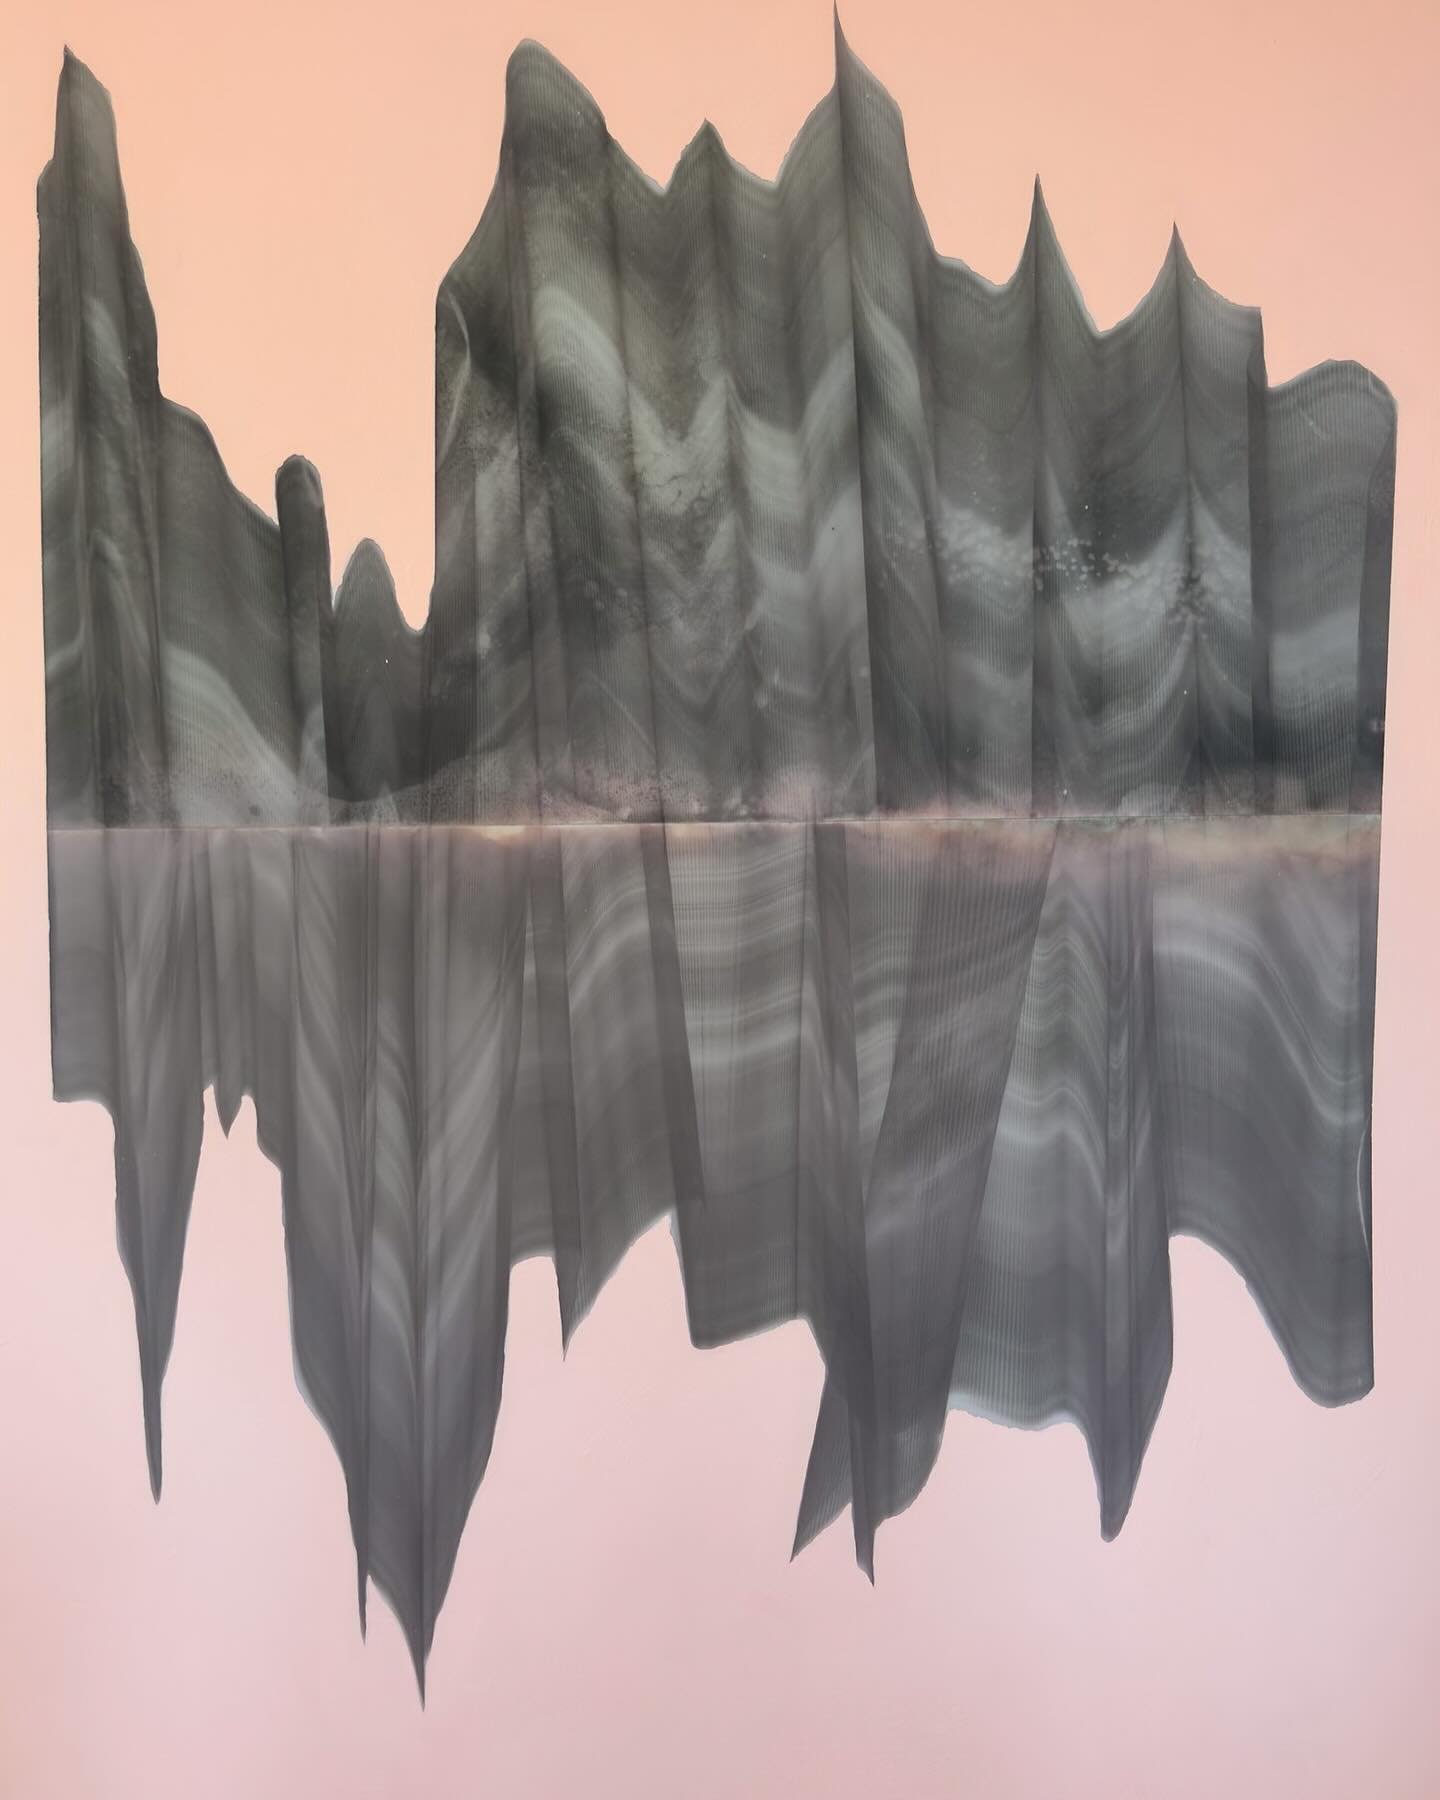 Peter Gronquist, Light Record
@elizabethleachgallery 
First Thursday Reception: May 2, 5:30 - 7:30pm
May 2 - June 1, 2024

In this new body of work Gronquist has created a series of elegant, gestural #abstractions that seamlessly combine the fundamen